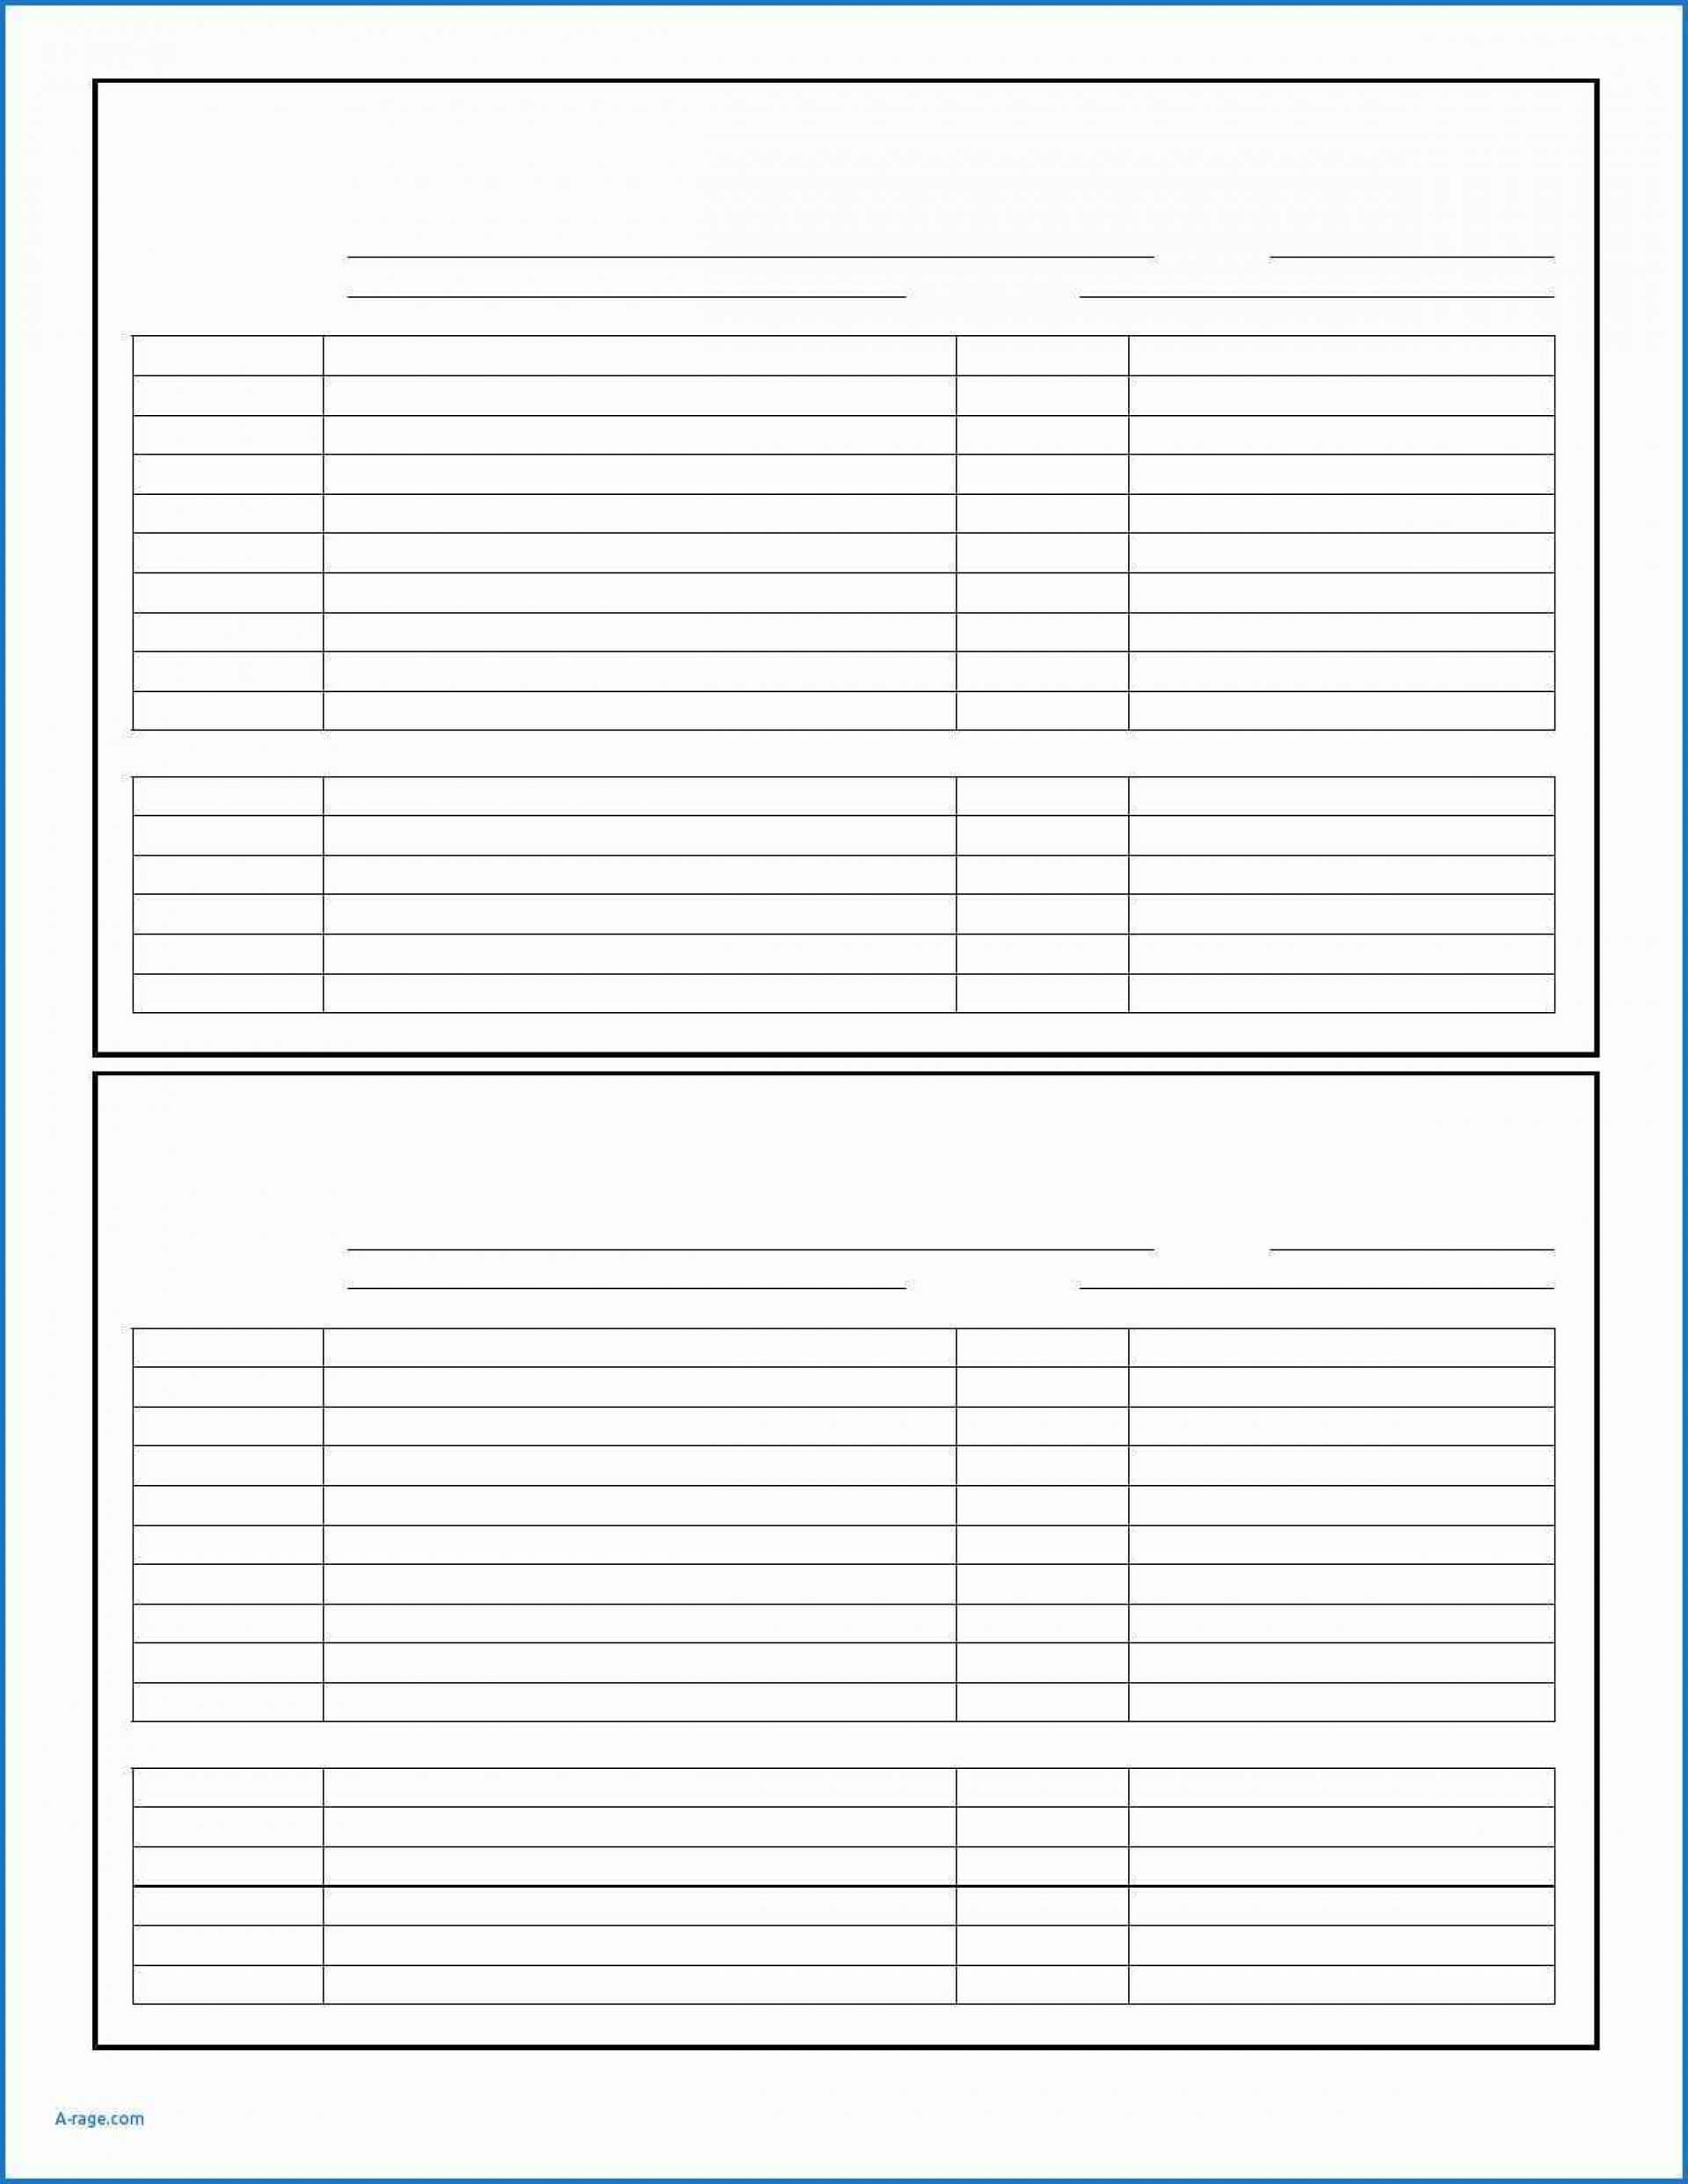 040 Fillable And Fastpitch Softball Lineup Cards Baseball Within Softball Lineup Card Template